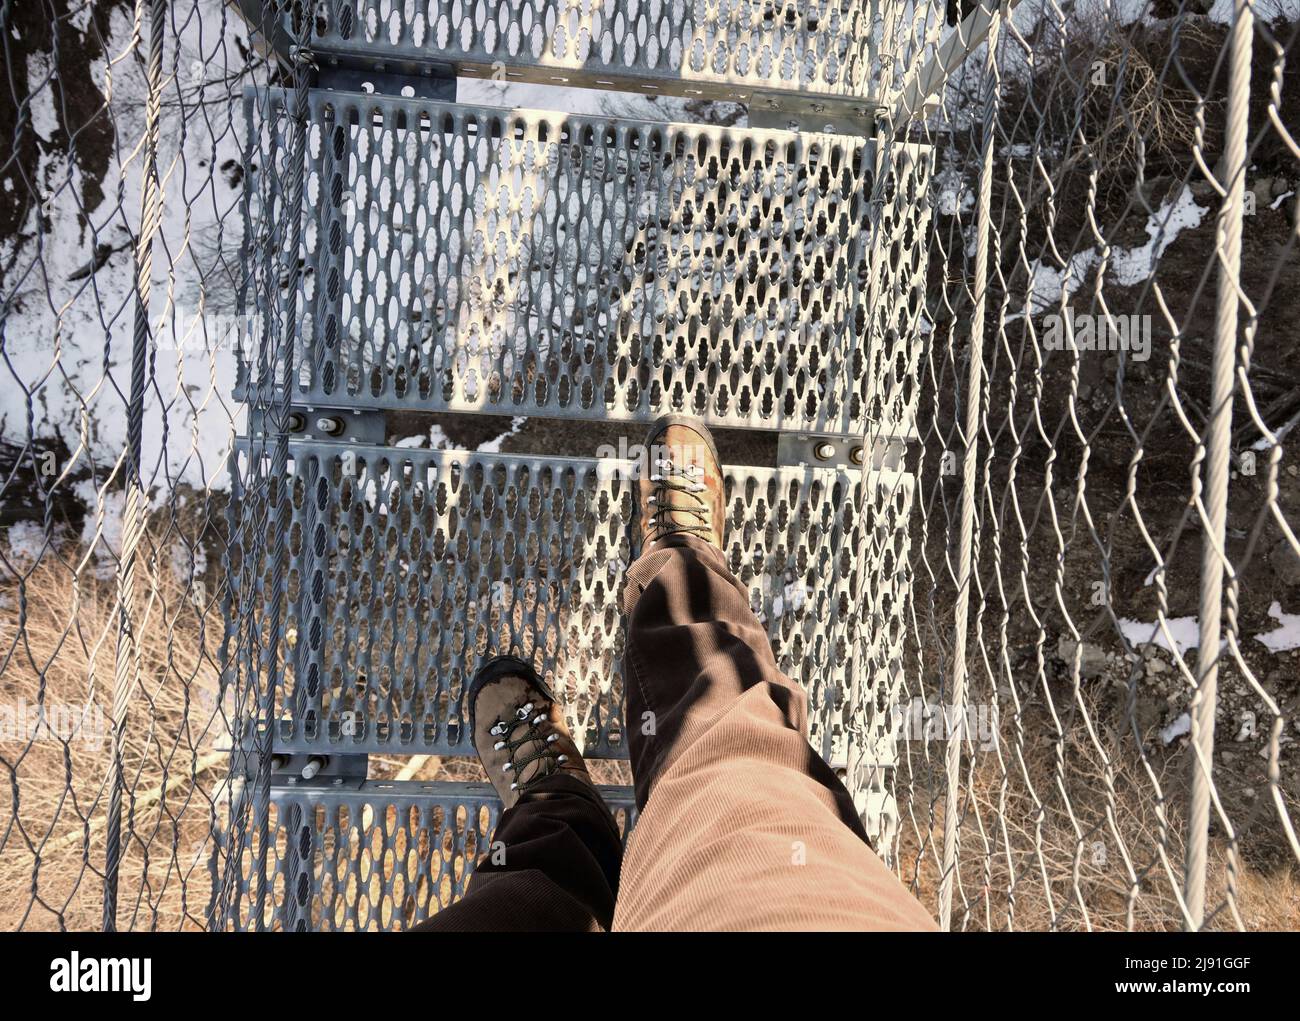 lightweight boots and legs of man on the spectacular suspension bridge made of steel ropes and metal sleepers Stock Photo